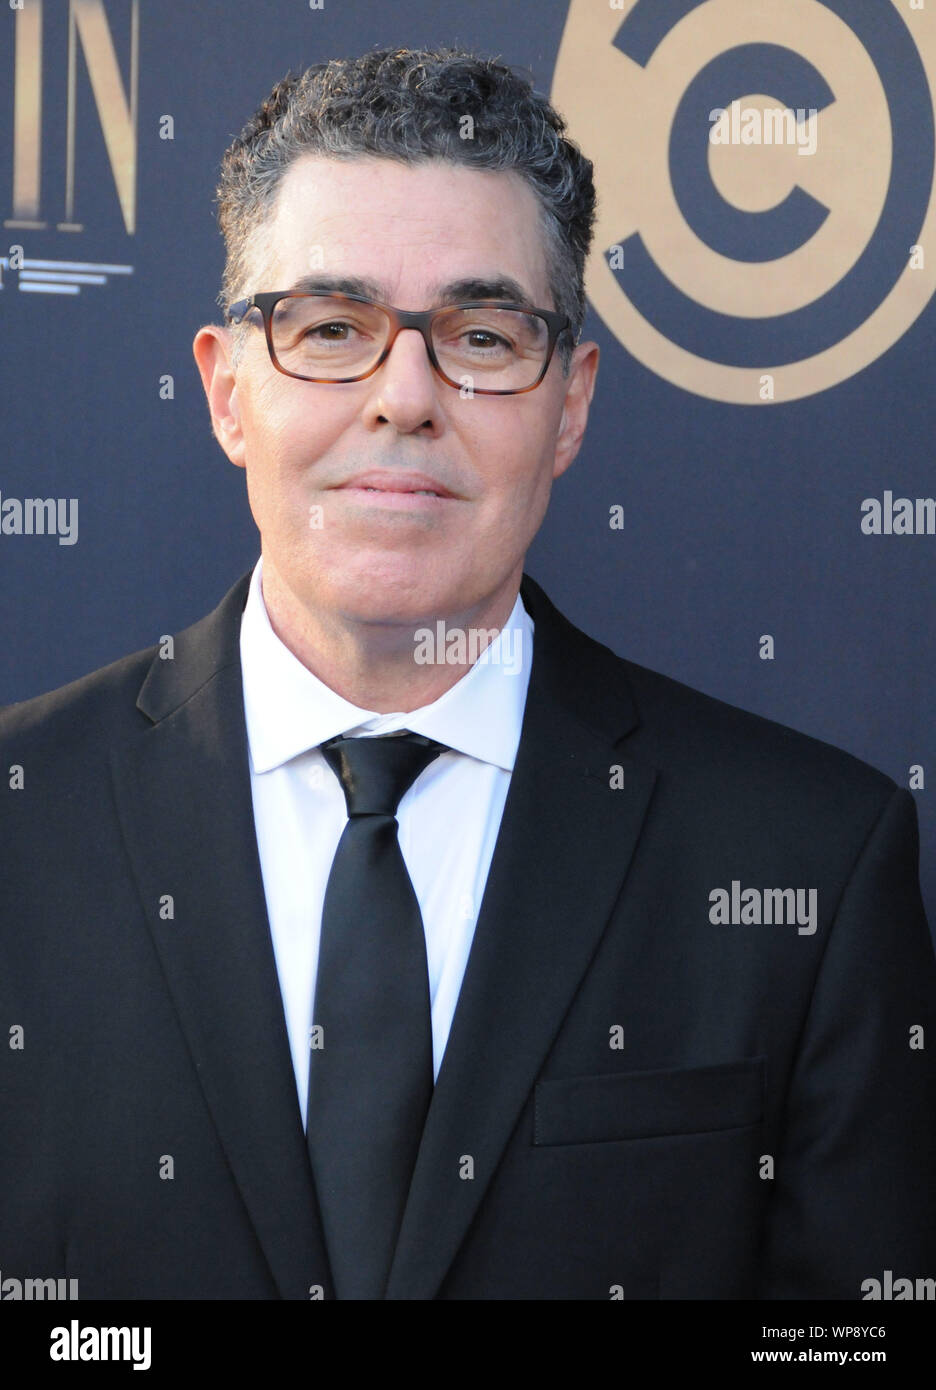 Beverly Hills, California, USA 7th September 2019 Comedian Adam Carolla attends The Comedy Central Roast of Alec Baldwin on September 7, 2019 at Saban Theatre in Beverly Hills, California, USA. Photo by Barry King/Alamy Live News Stock Photo